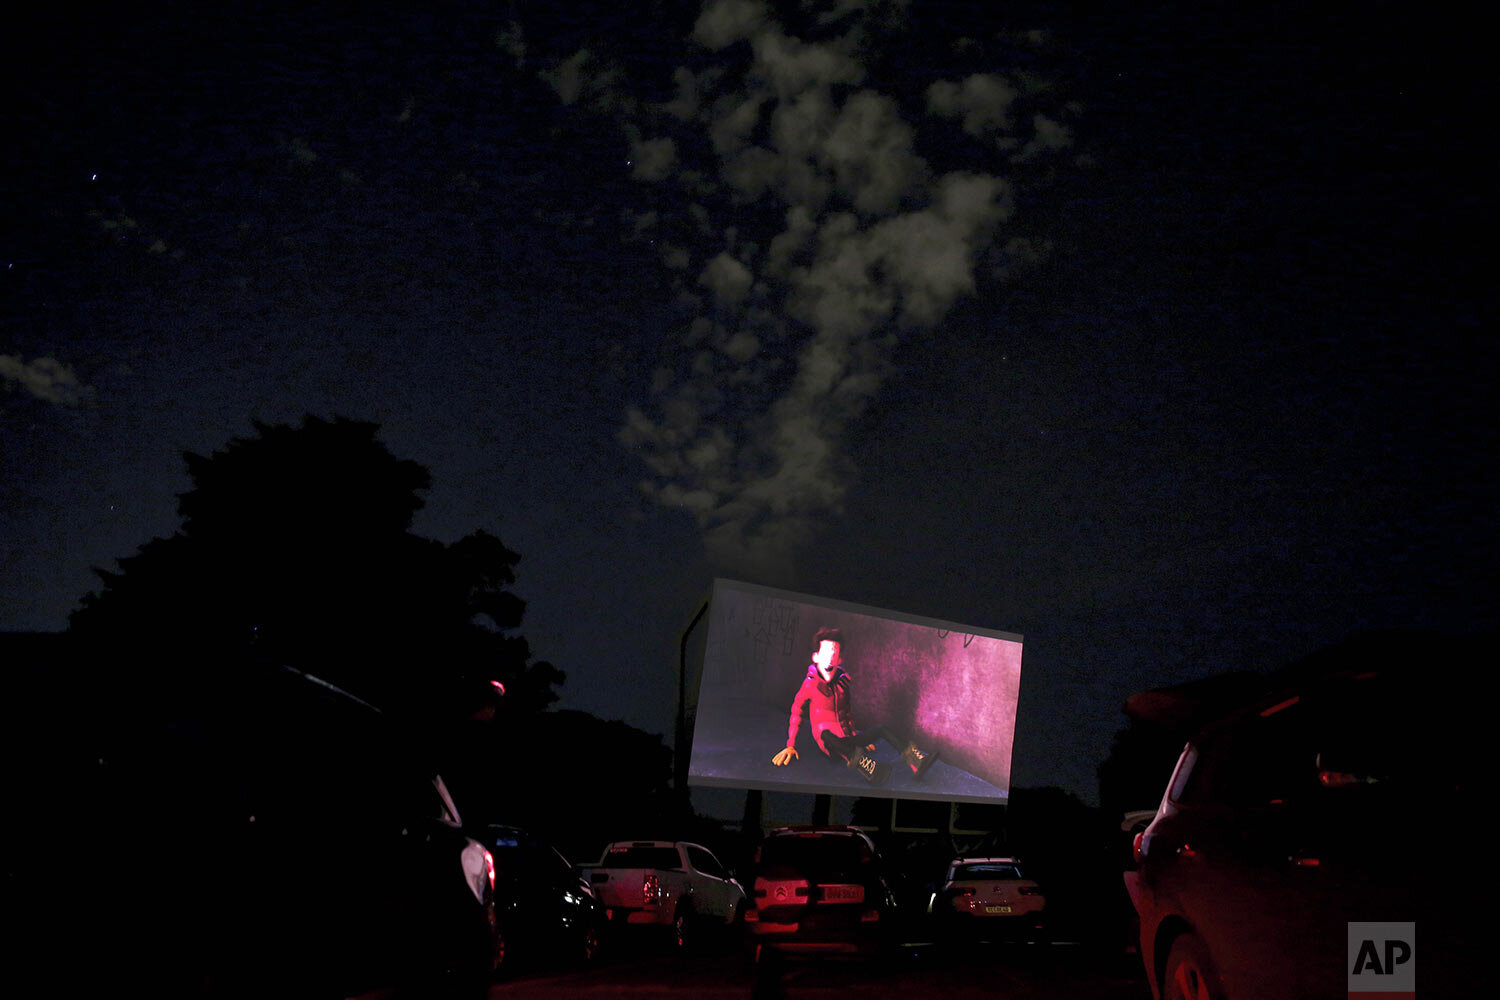  A screen plays a movie at a drive-in movie theater where drivers must leave one space empty between them amid the new coronavirus pandemic in Brasilia, Brazil, May 13, 2020. (AP Photo/Eraldo Peres) 